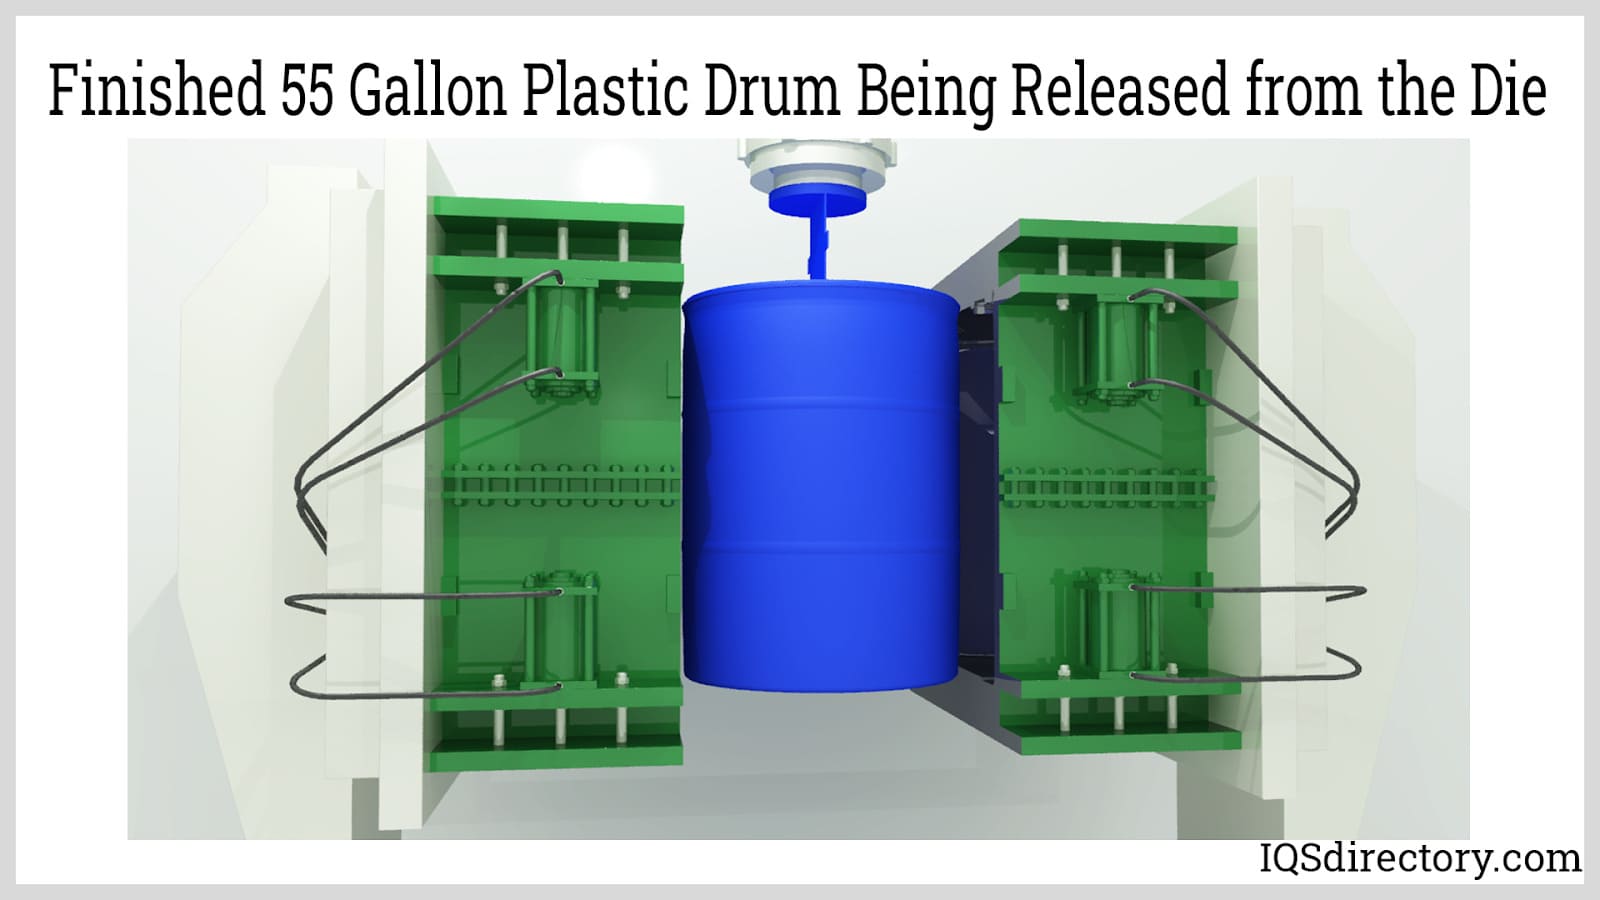 Finished 55 Gallon Plastic Drum Being Released from the Die